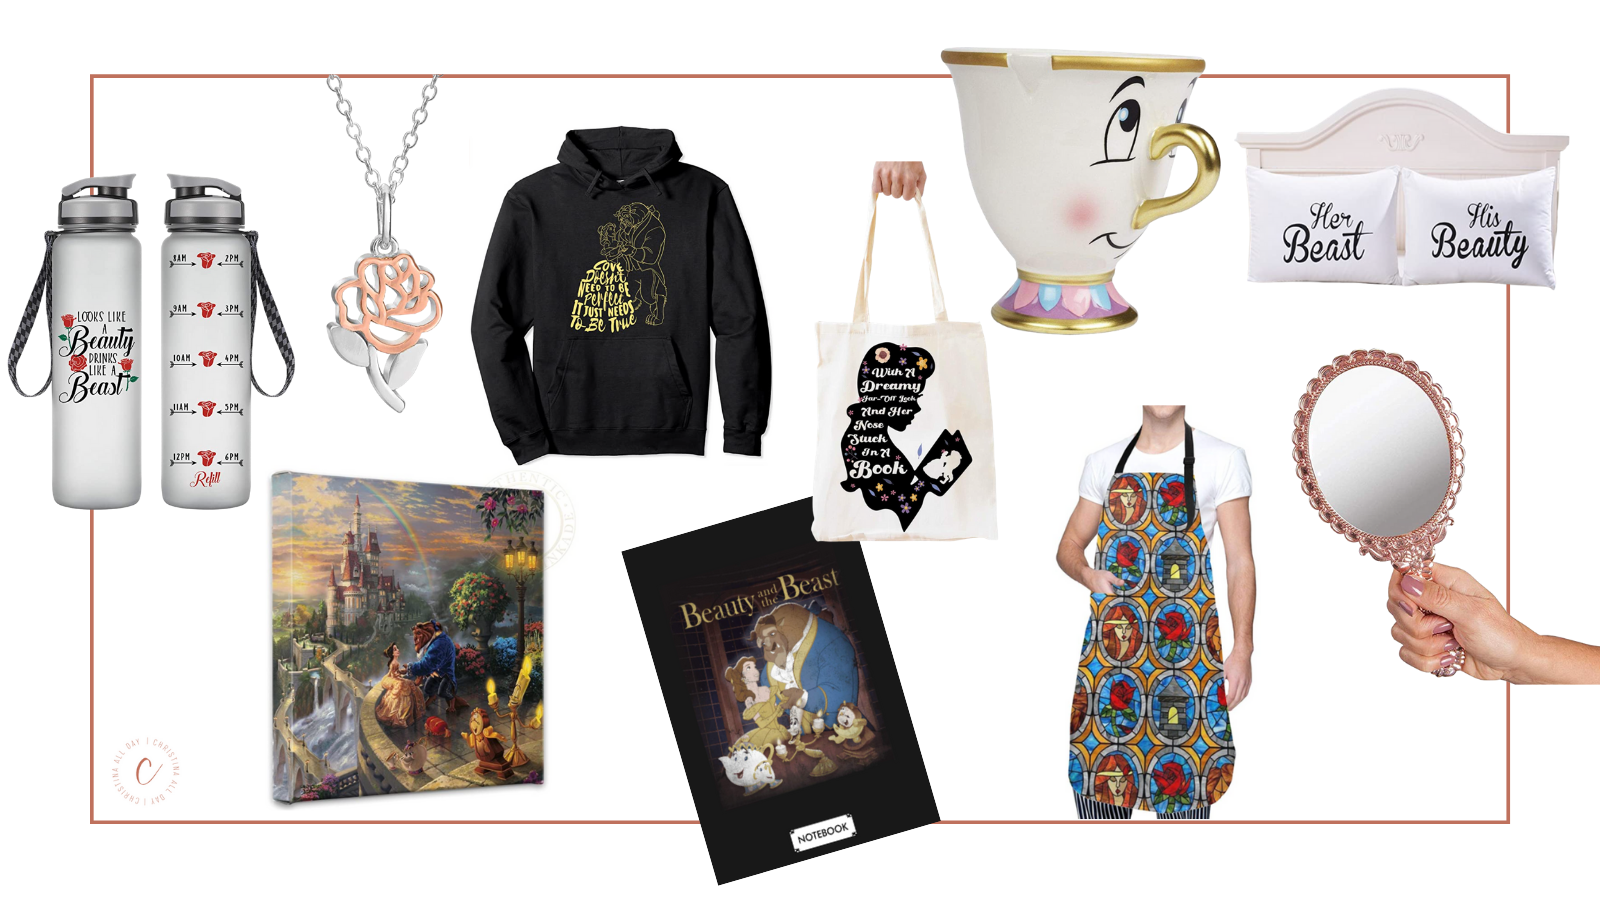 10 Best Beauty and Beast Gift Ideas for Adults